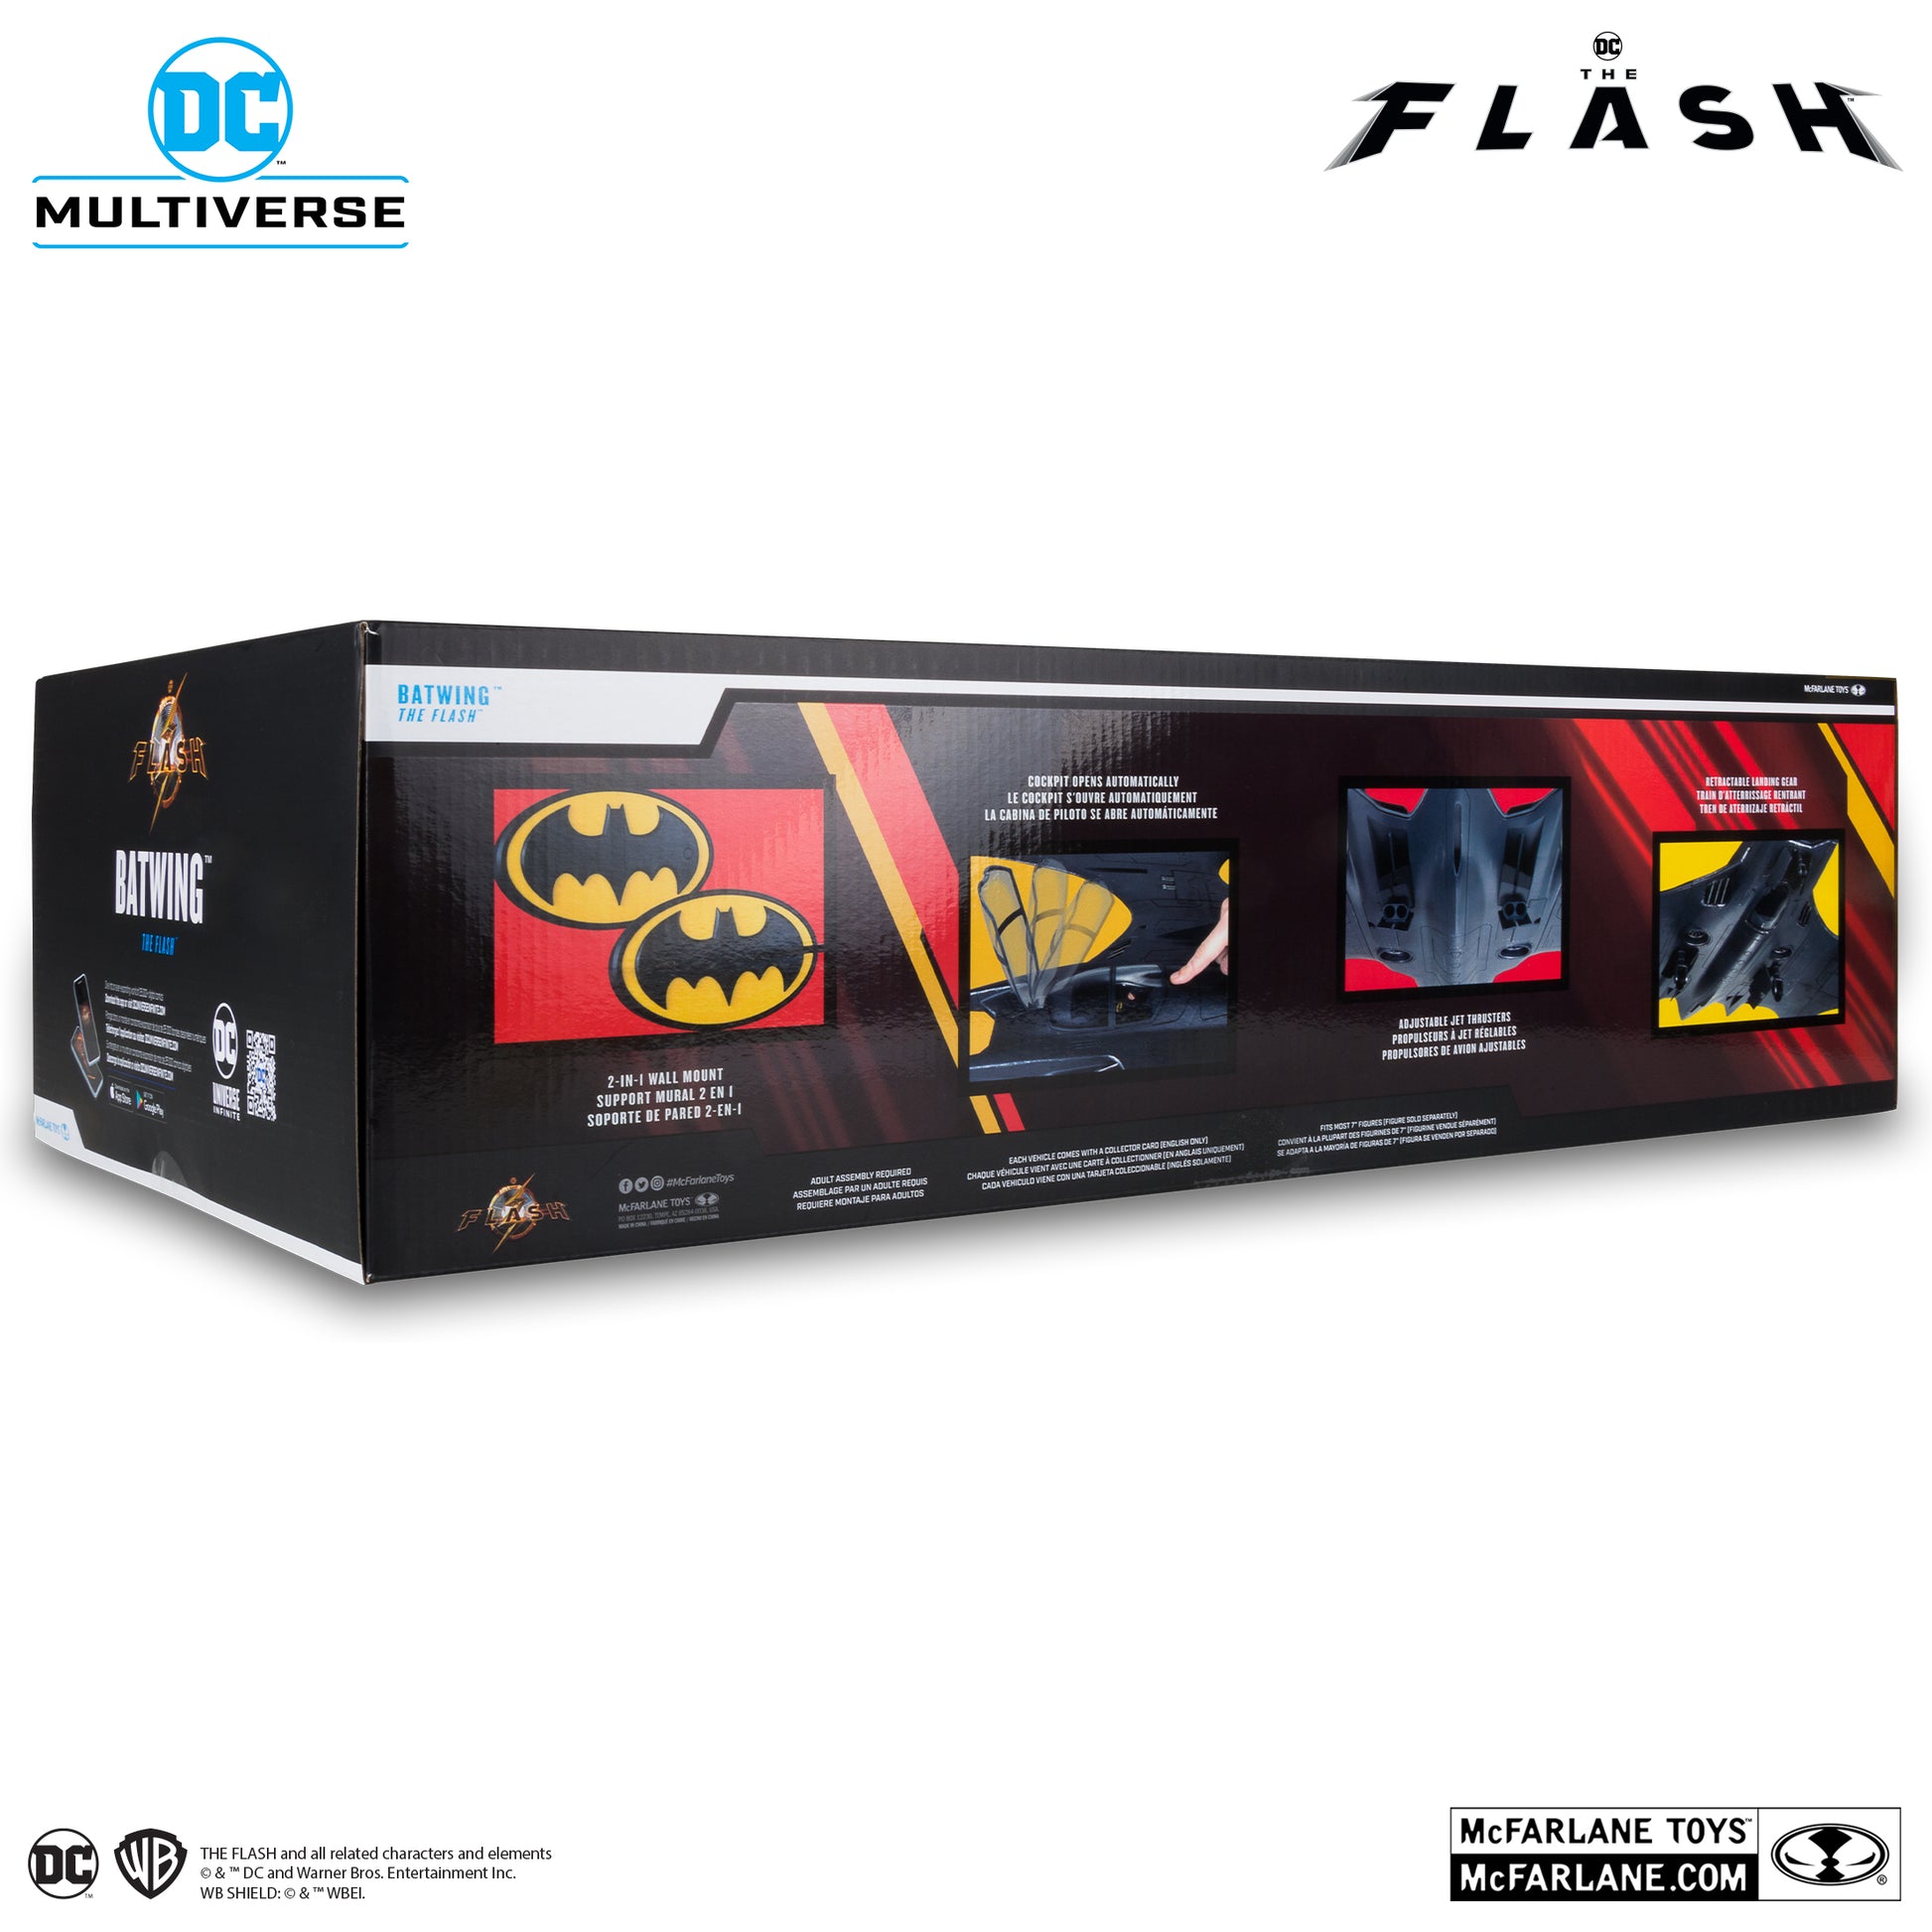 BATWING (GOLD LABEL) (THE FLASH MOVIE) in a box - heretoserveyou